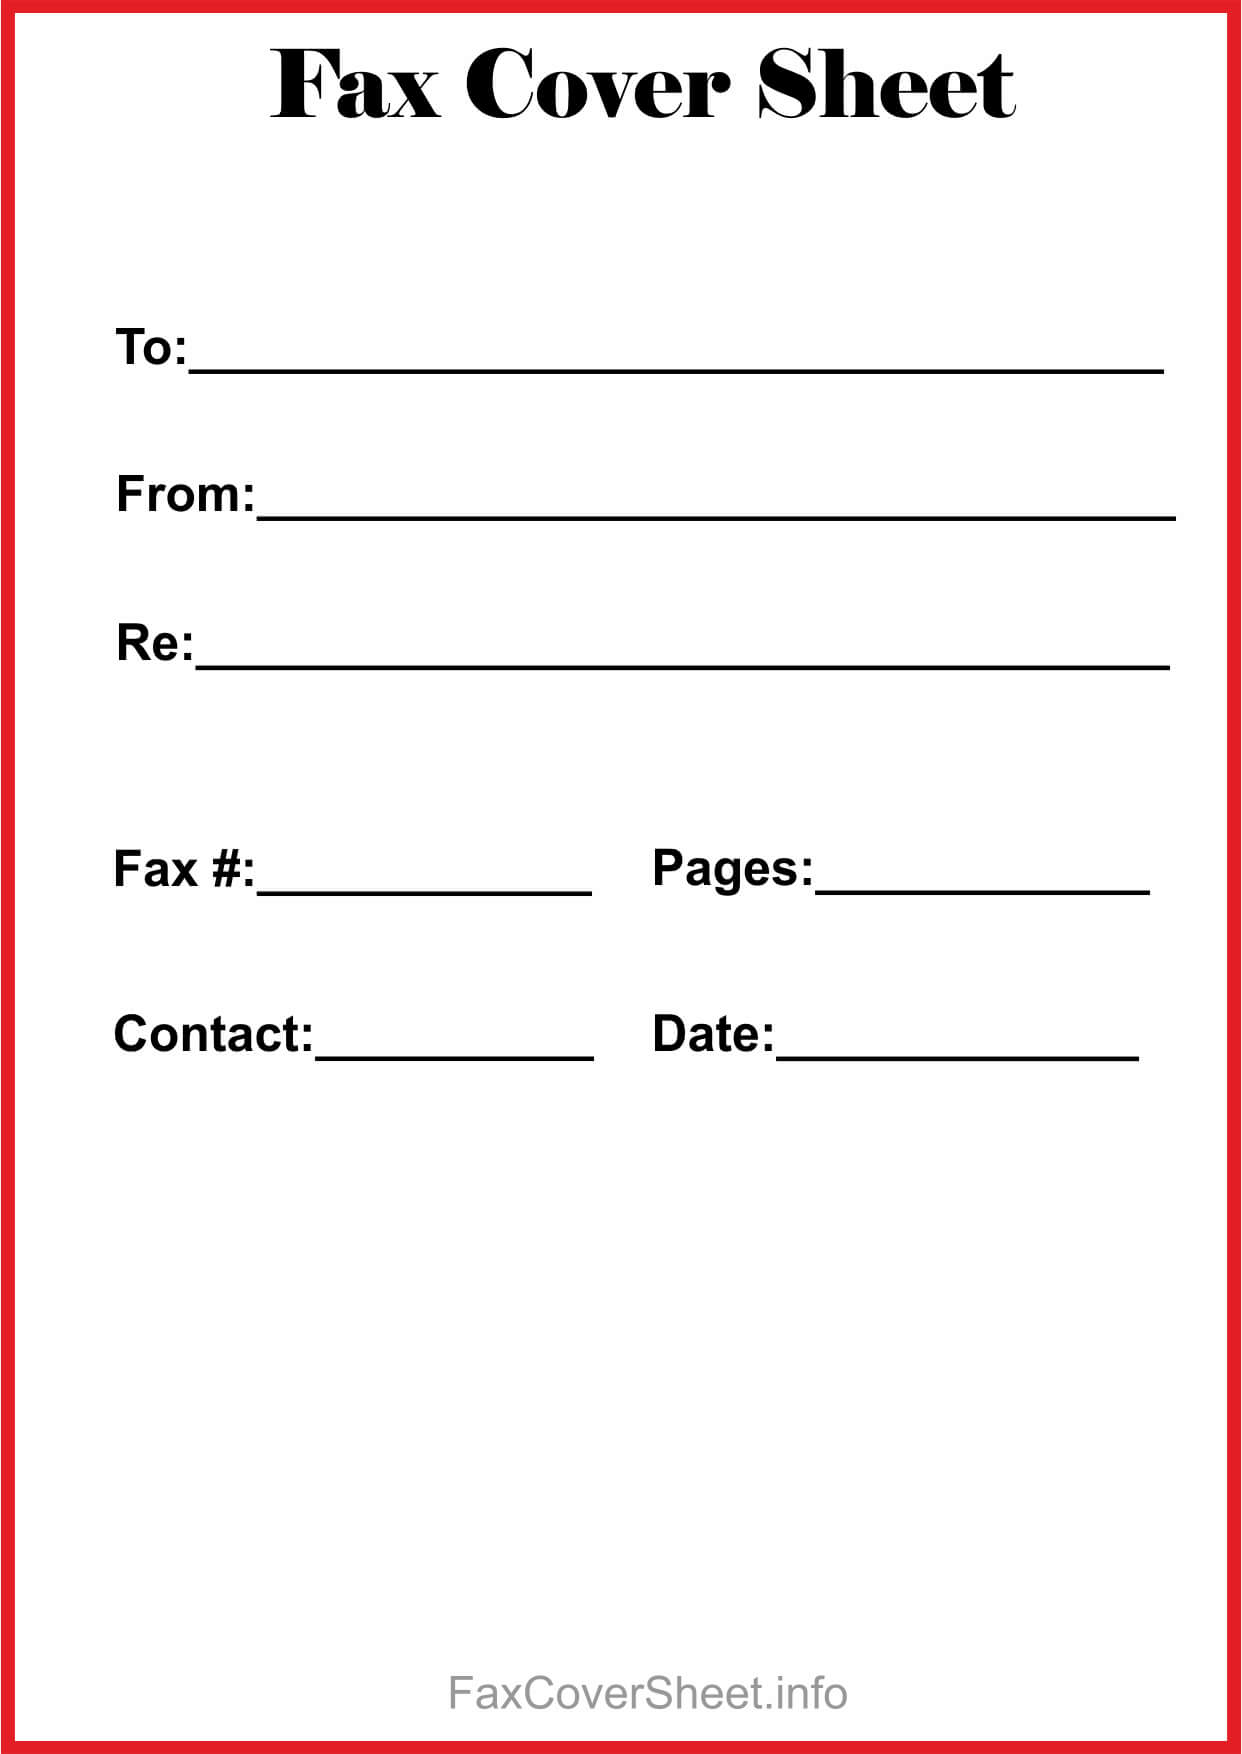 How To Find Blank Fax Cover Sheet Within Microsoft Word Inside Fax Cover Sheet Template Word 2010